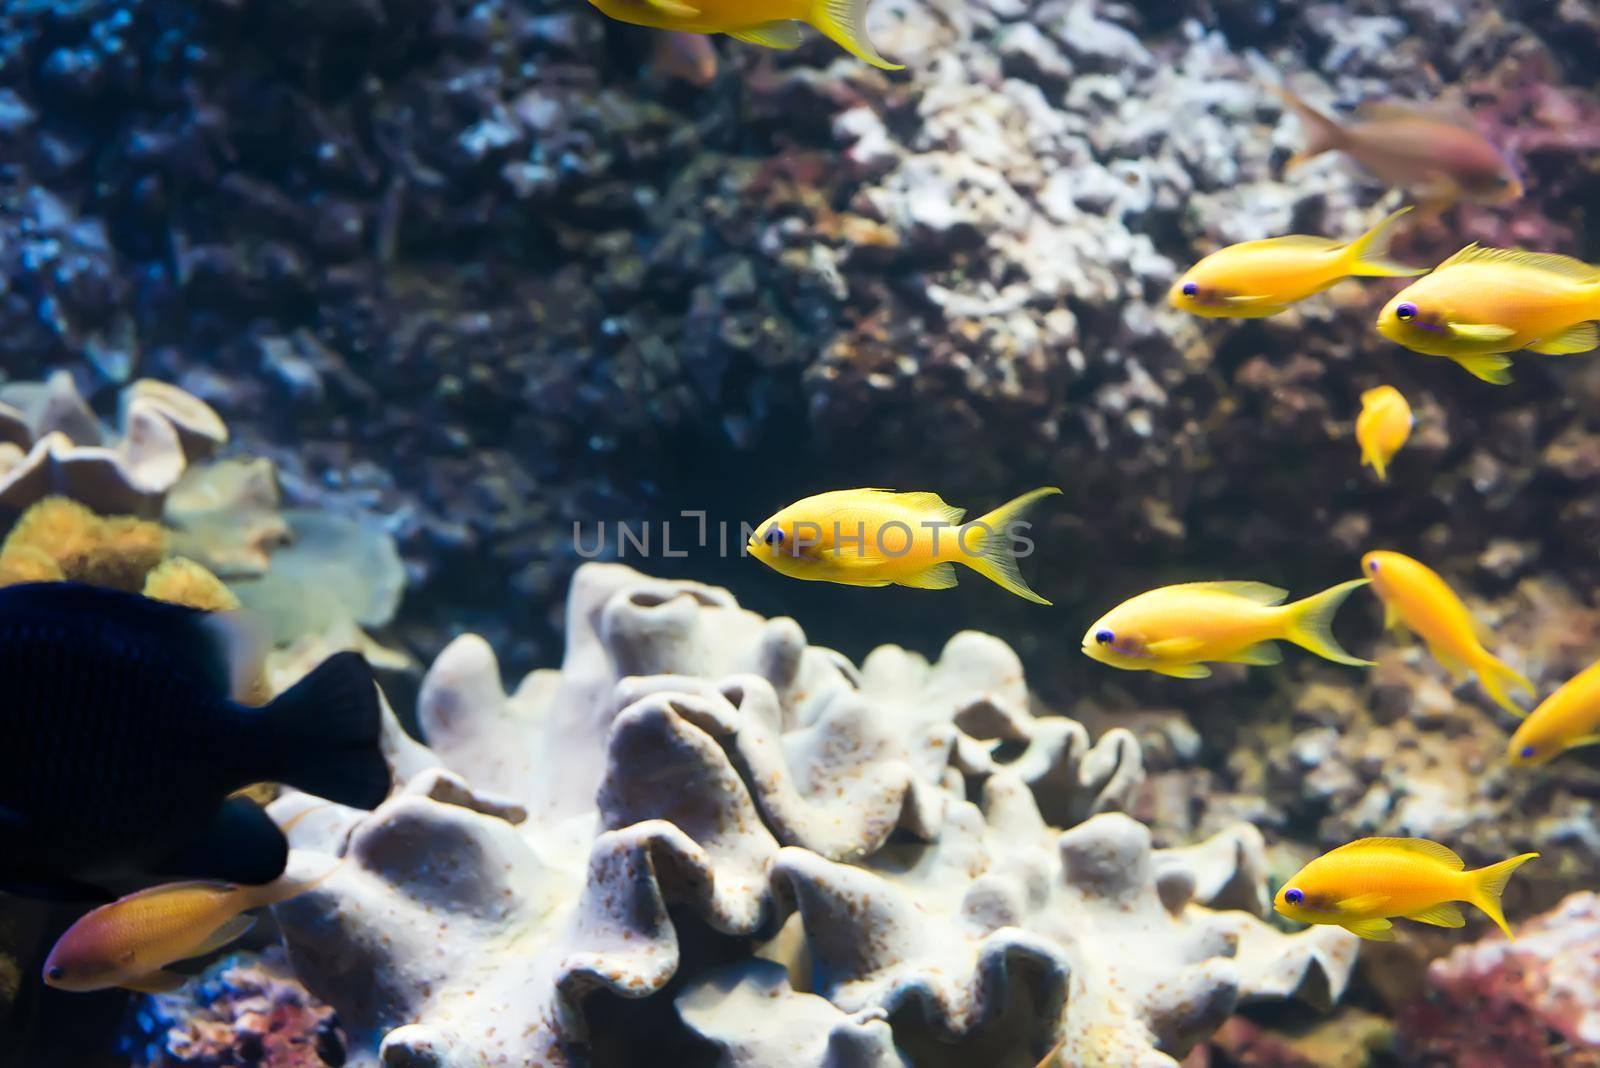 underwater image of colorful tropical fishes